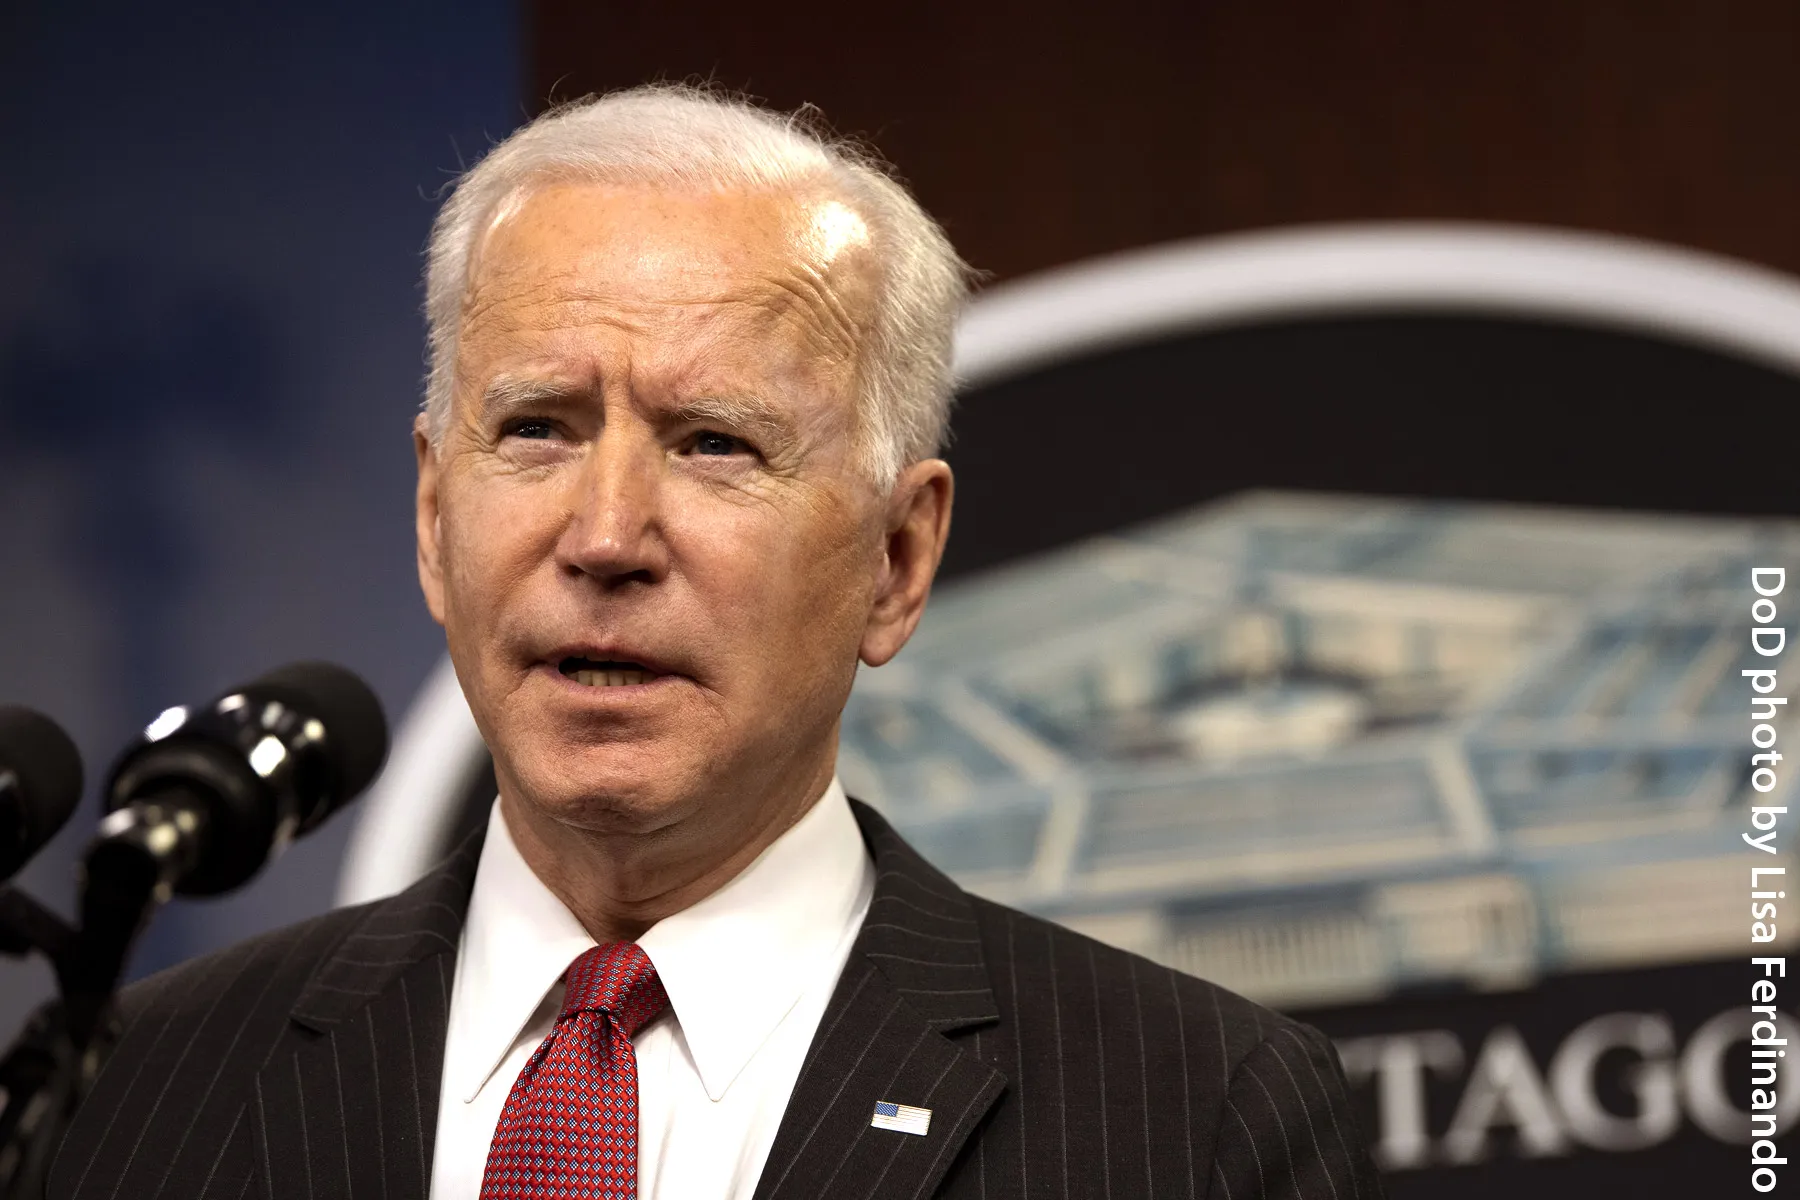 Non-COVID Highlights From Biden’s State of the Union Address